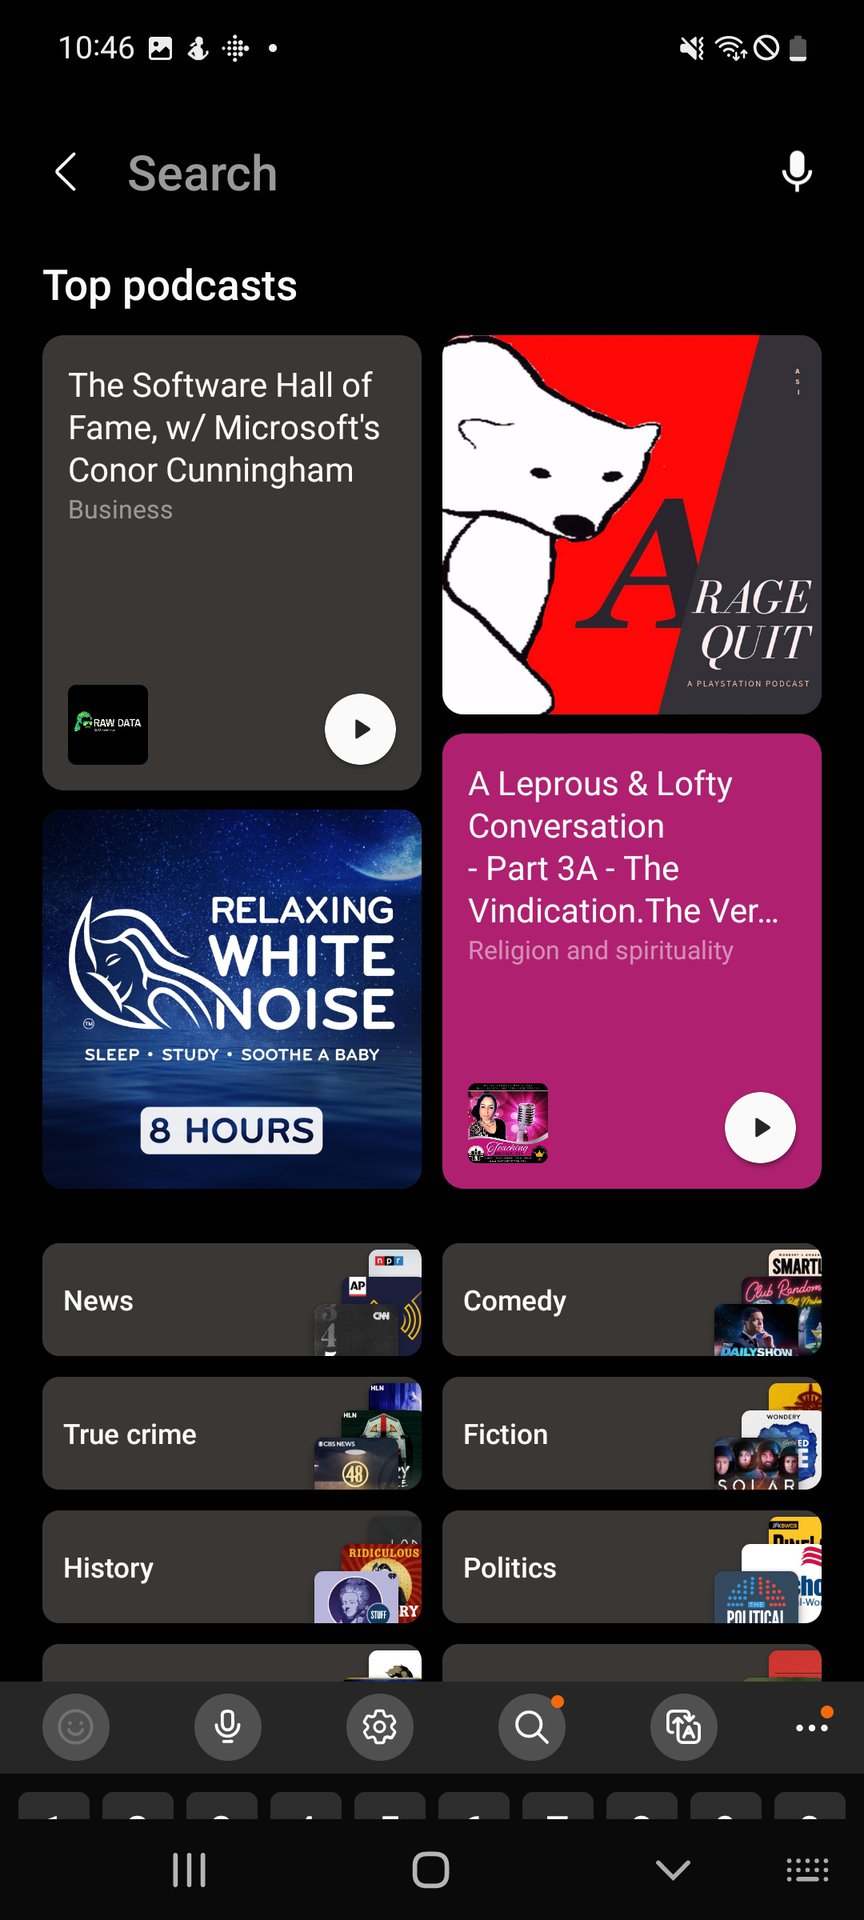 A screenshot of the Samsung Free service showing the Listen tab populated with podcasts.